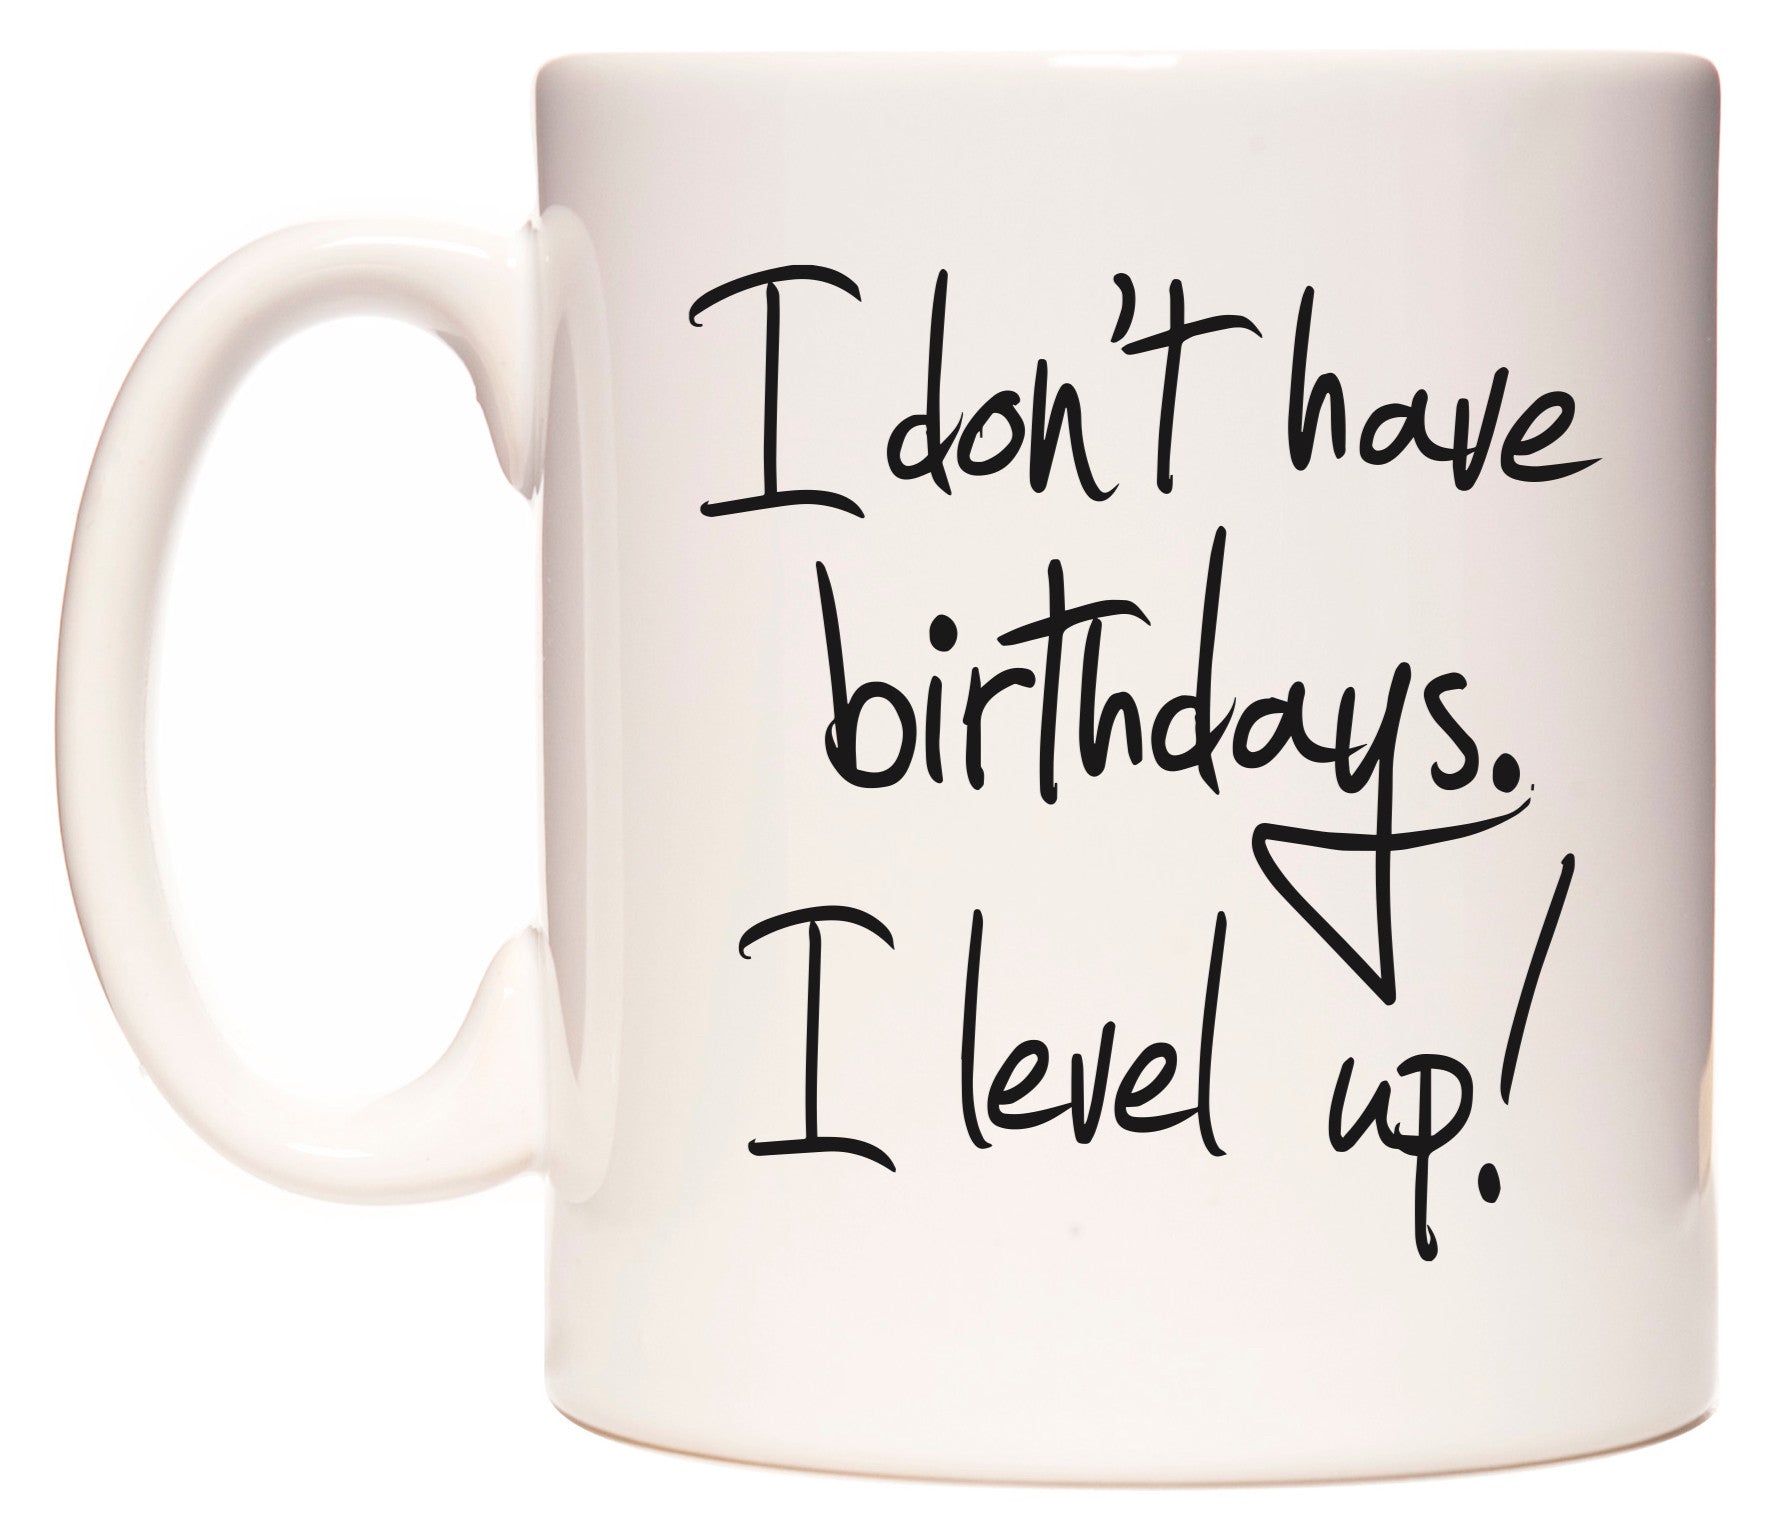 This mug features I don't have birthdays. I level up!